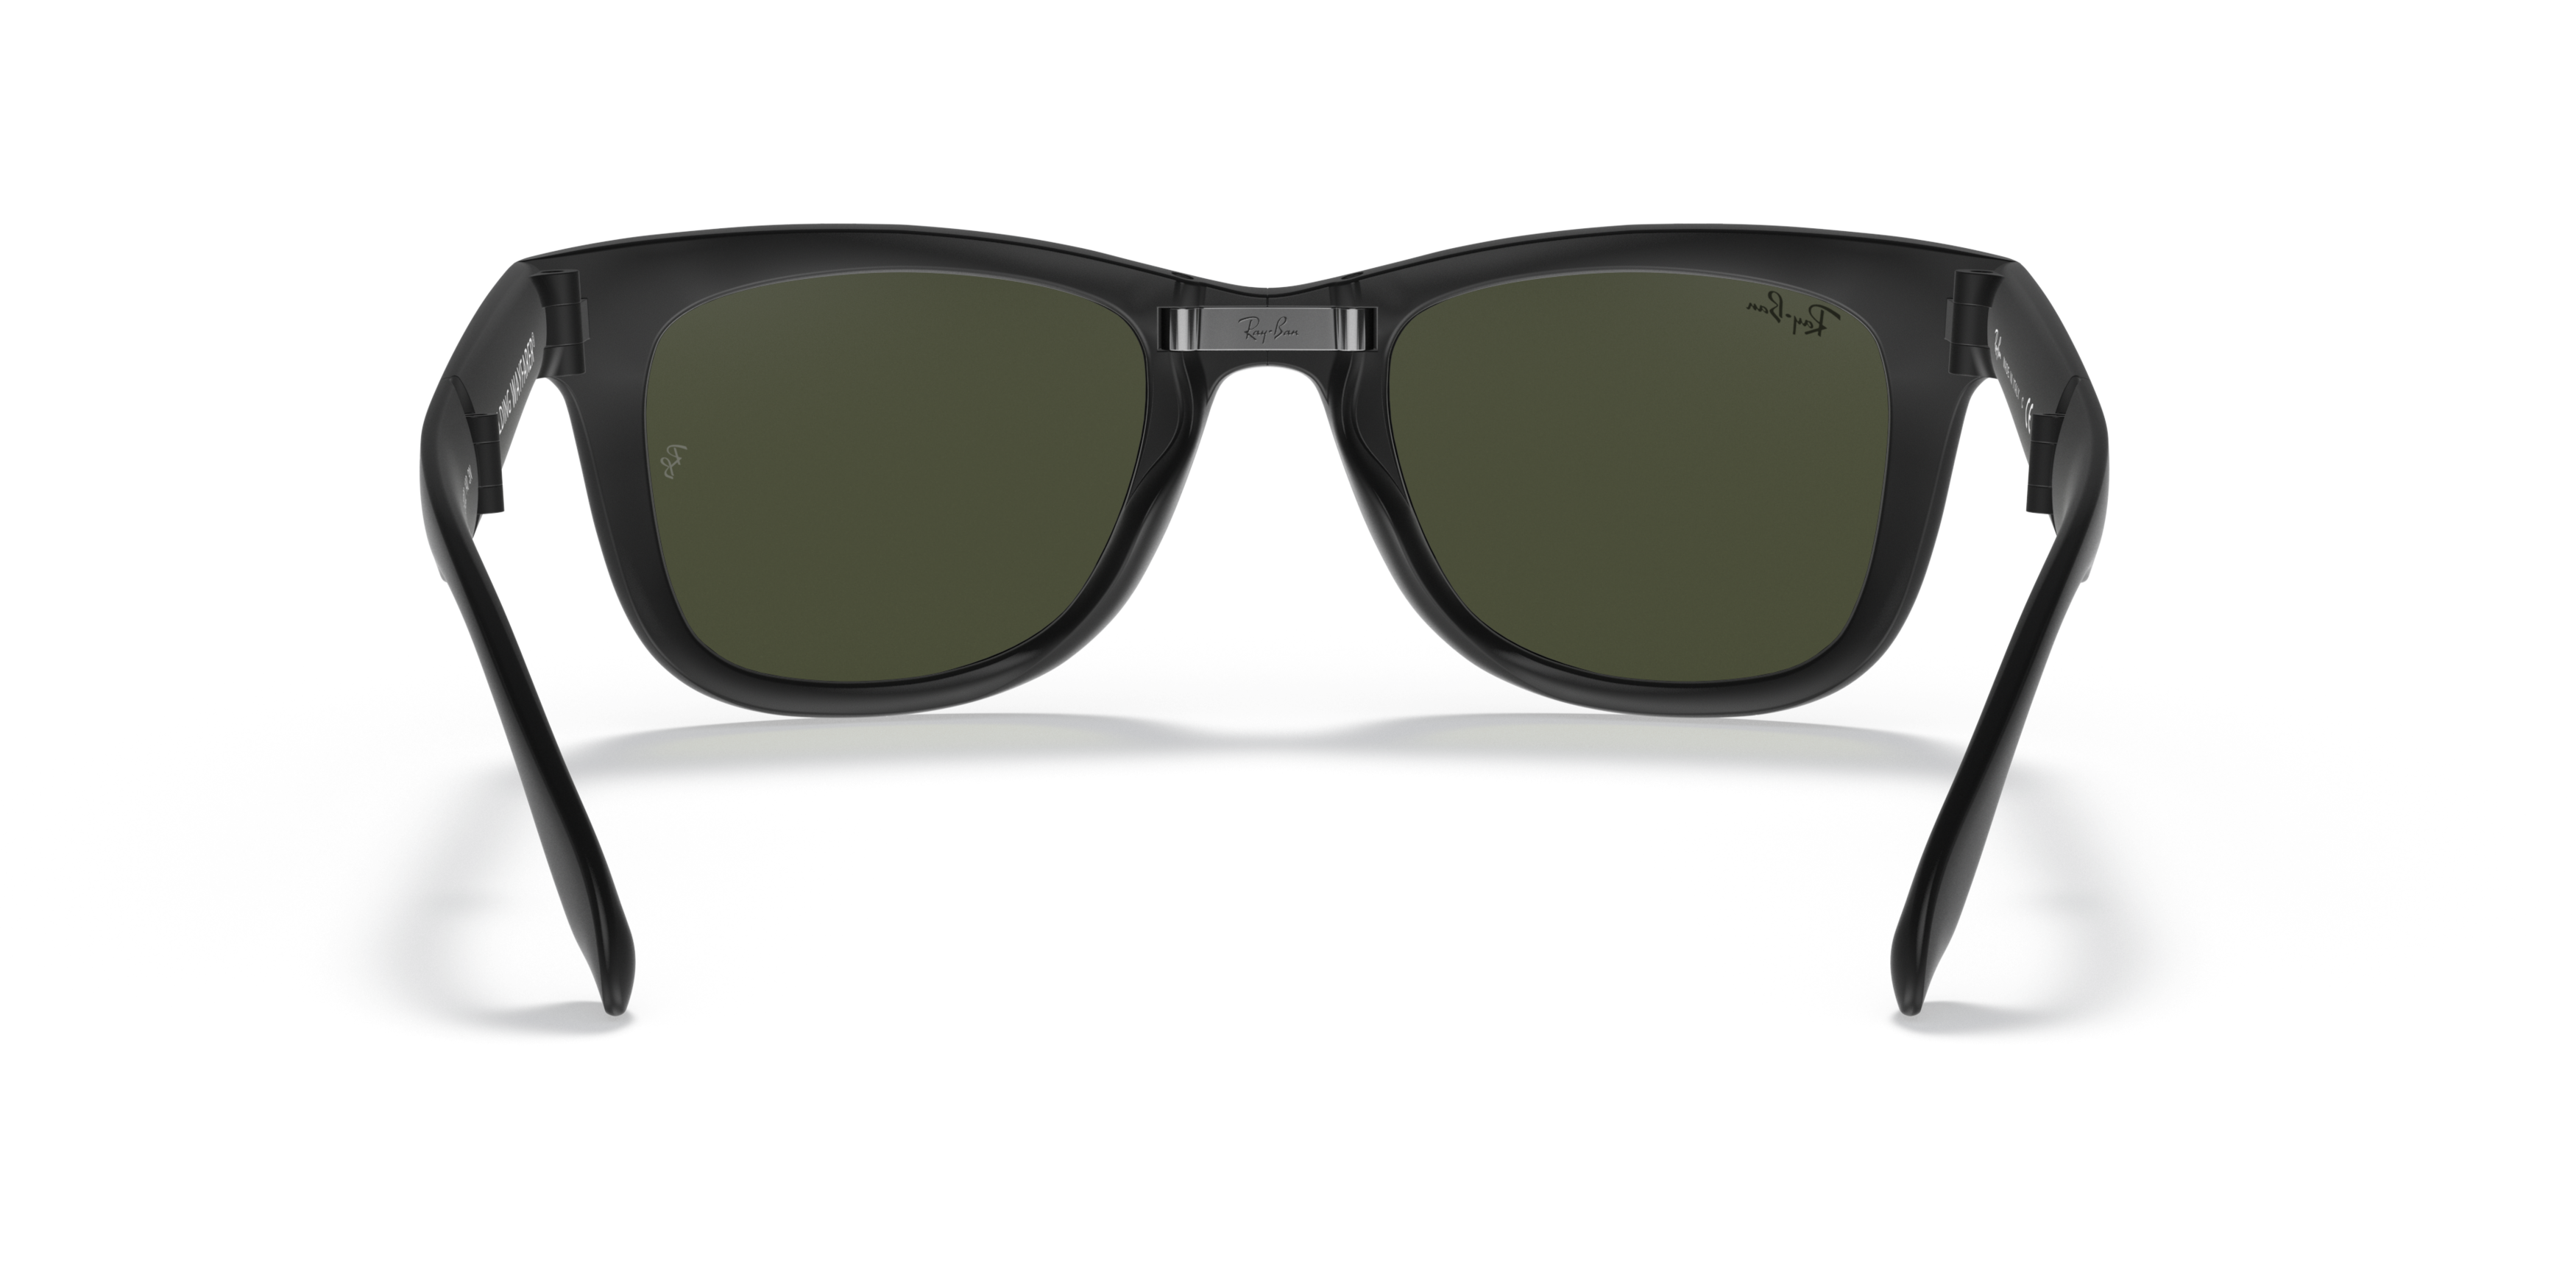 [products.image.detail02] Ray-Ban Wayfarer Folding Classic RB4105 601S